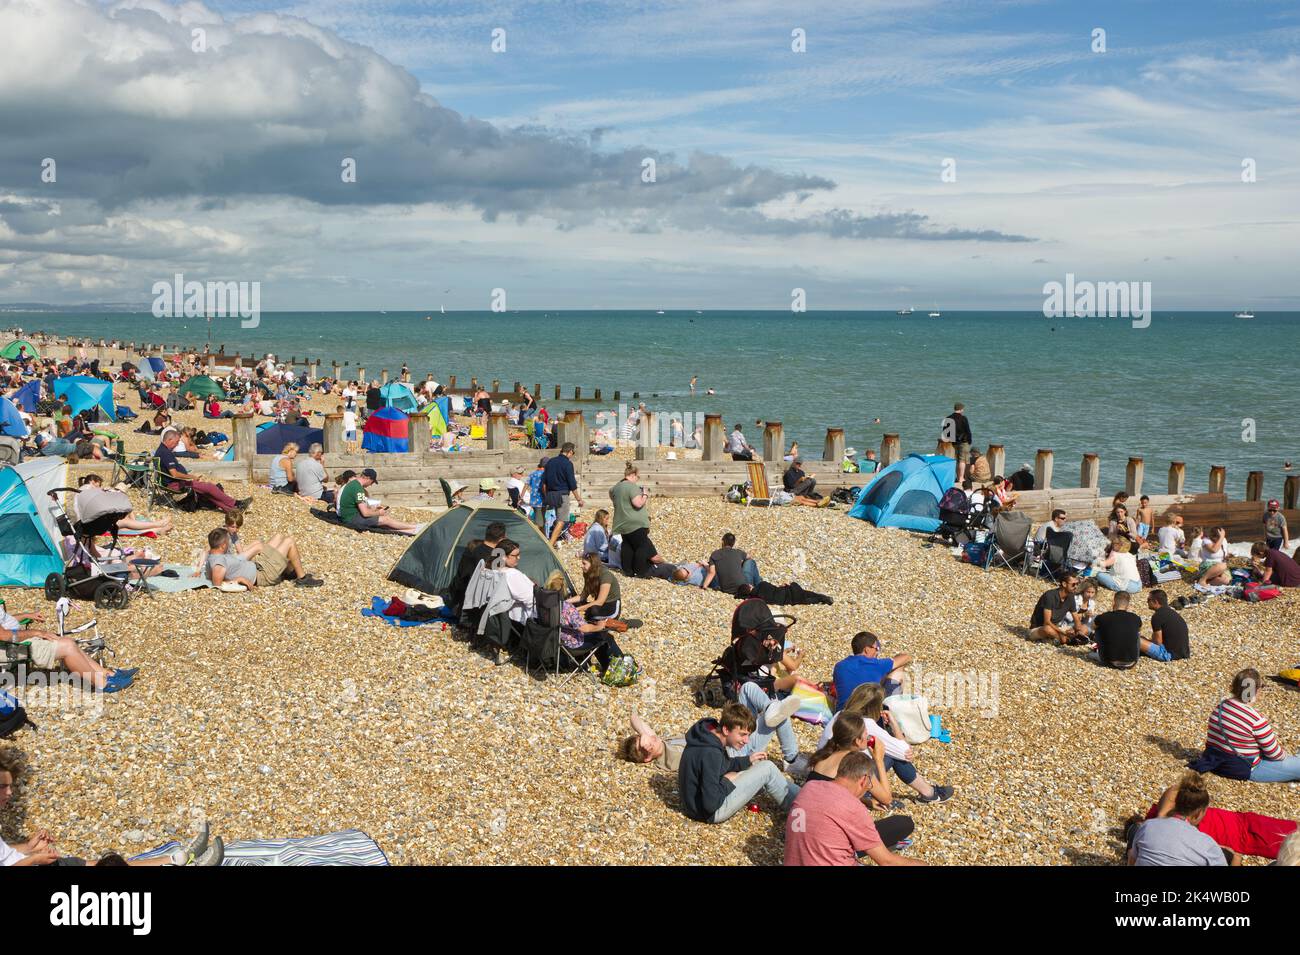 Lots of people crowding on the beach at Eastbourne, East Sussex, England. Waiting for the airshow to start. Stock Photo